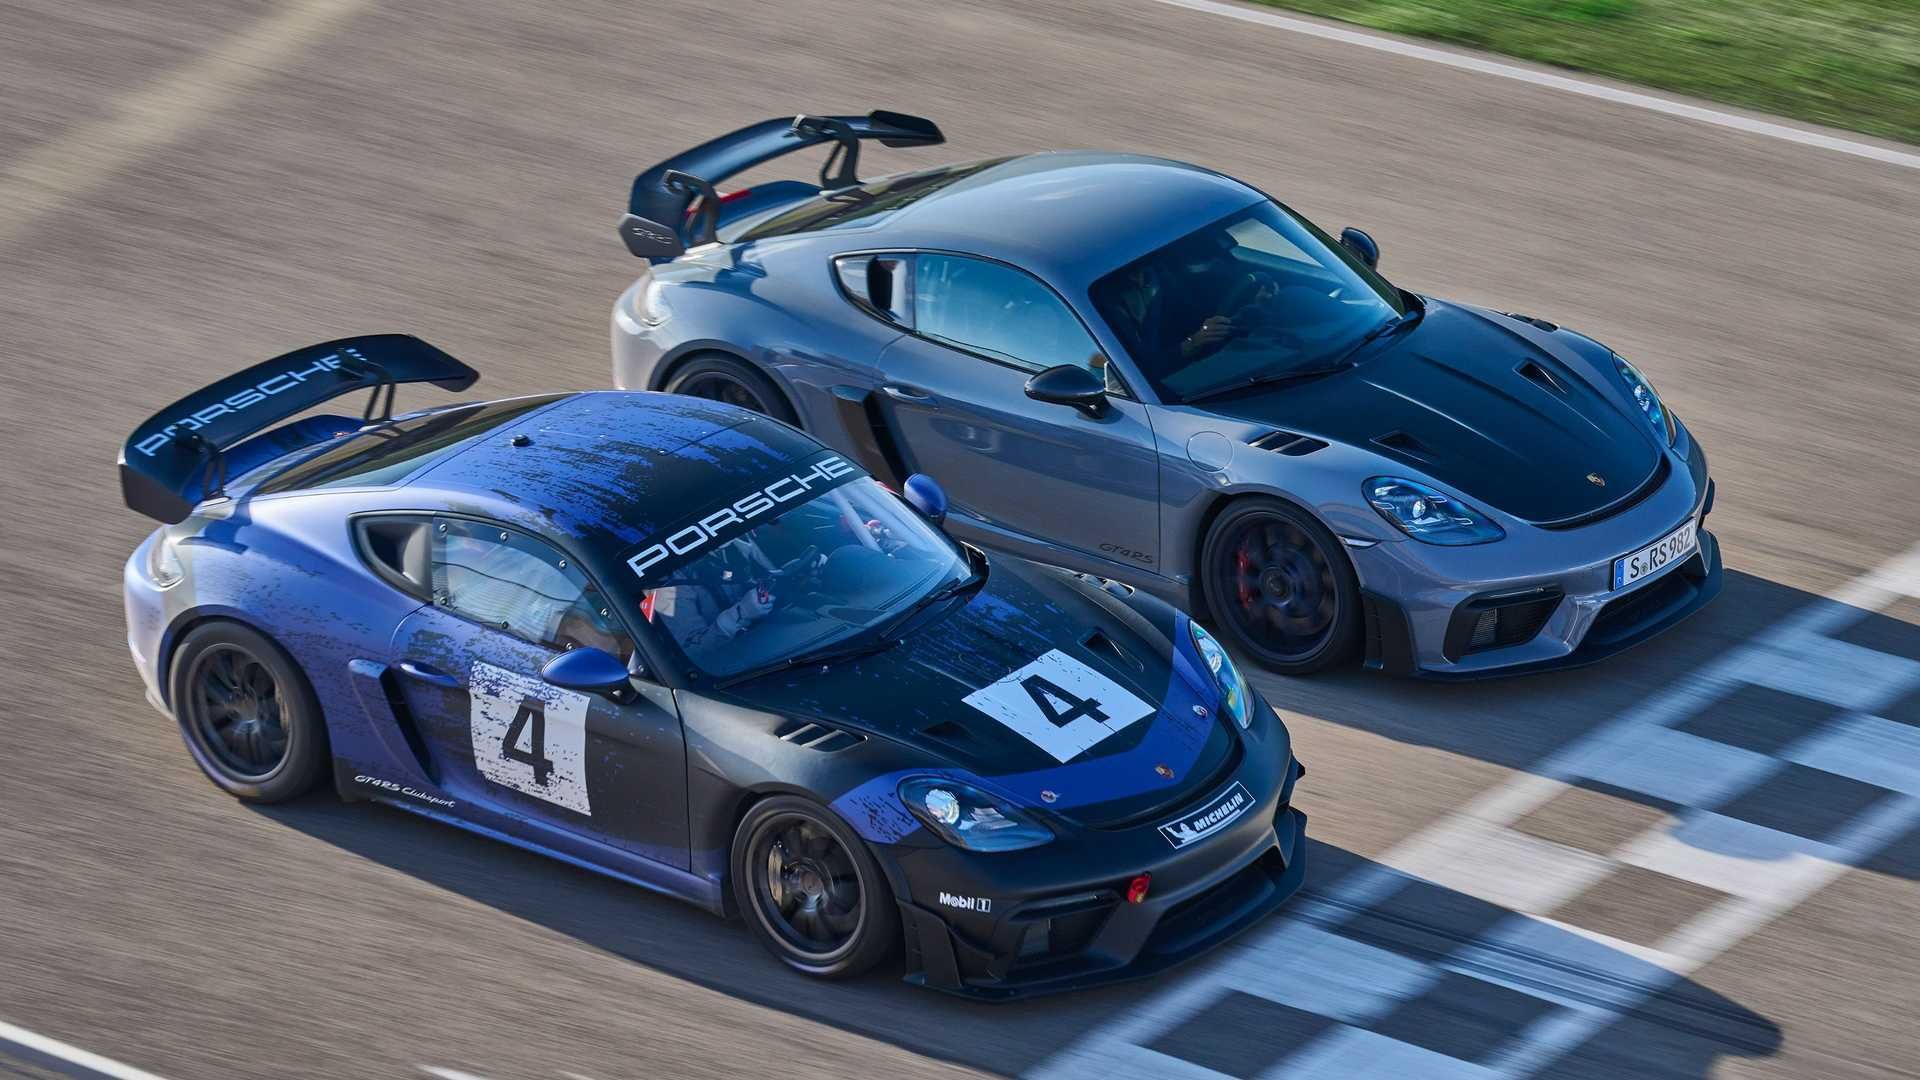 The 2022 Porsche 718 Cayman GT4 RS Has So Much More Than Just A